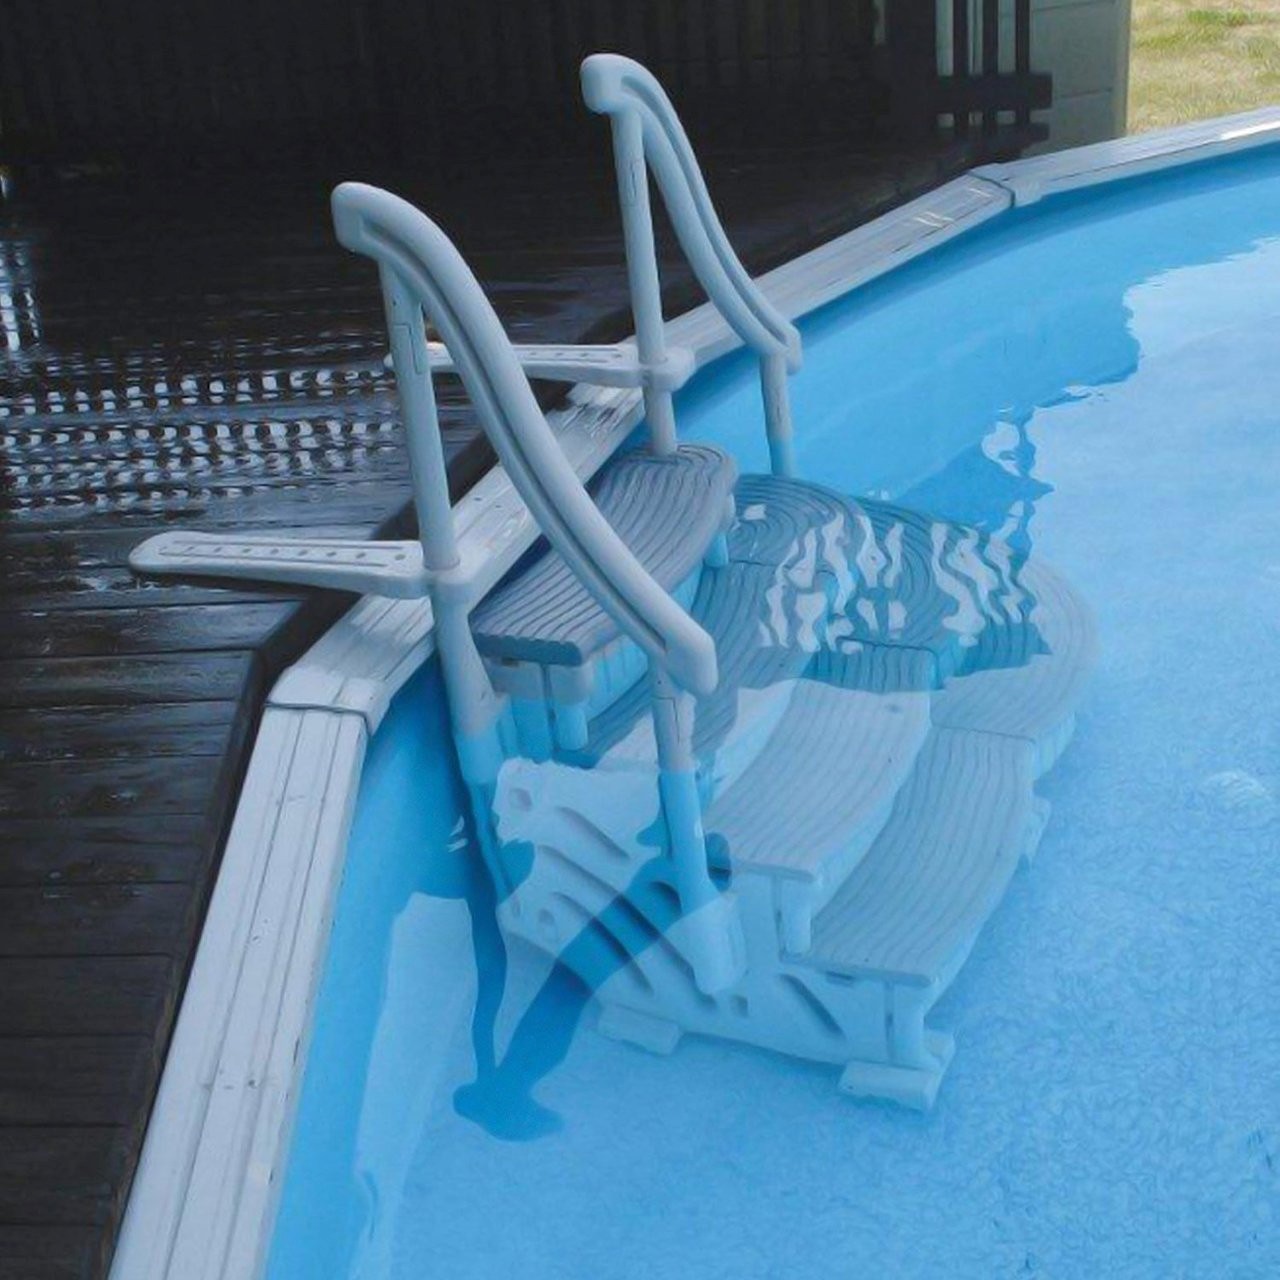 How To Attach Pool Ladder To Deck